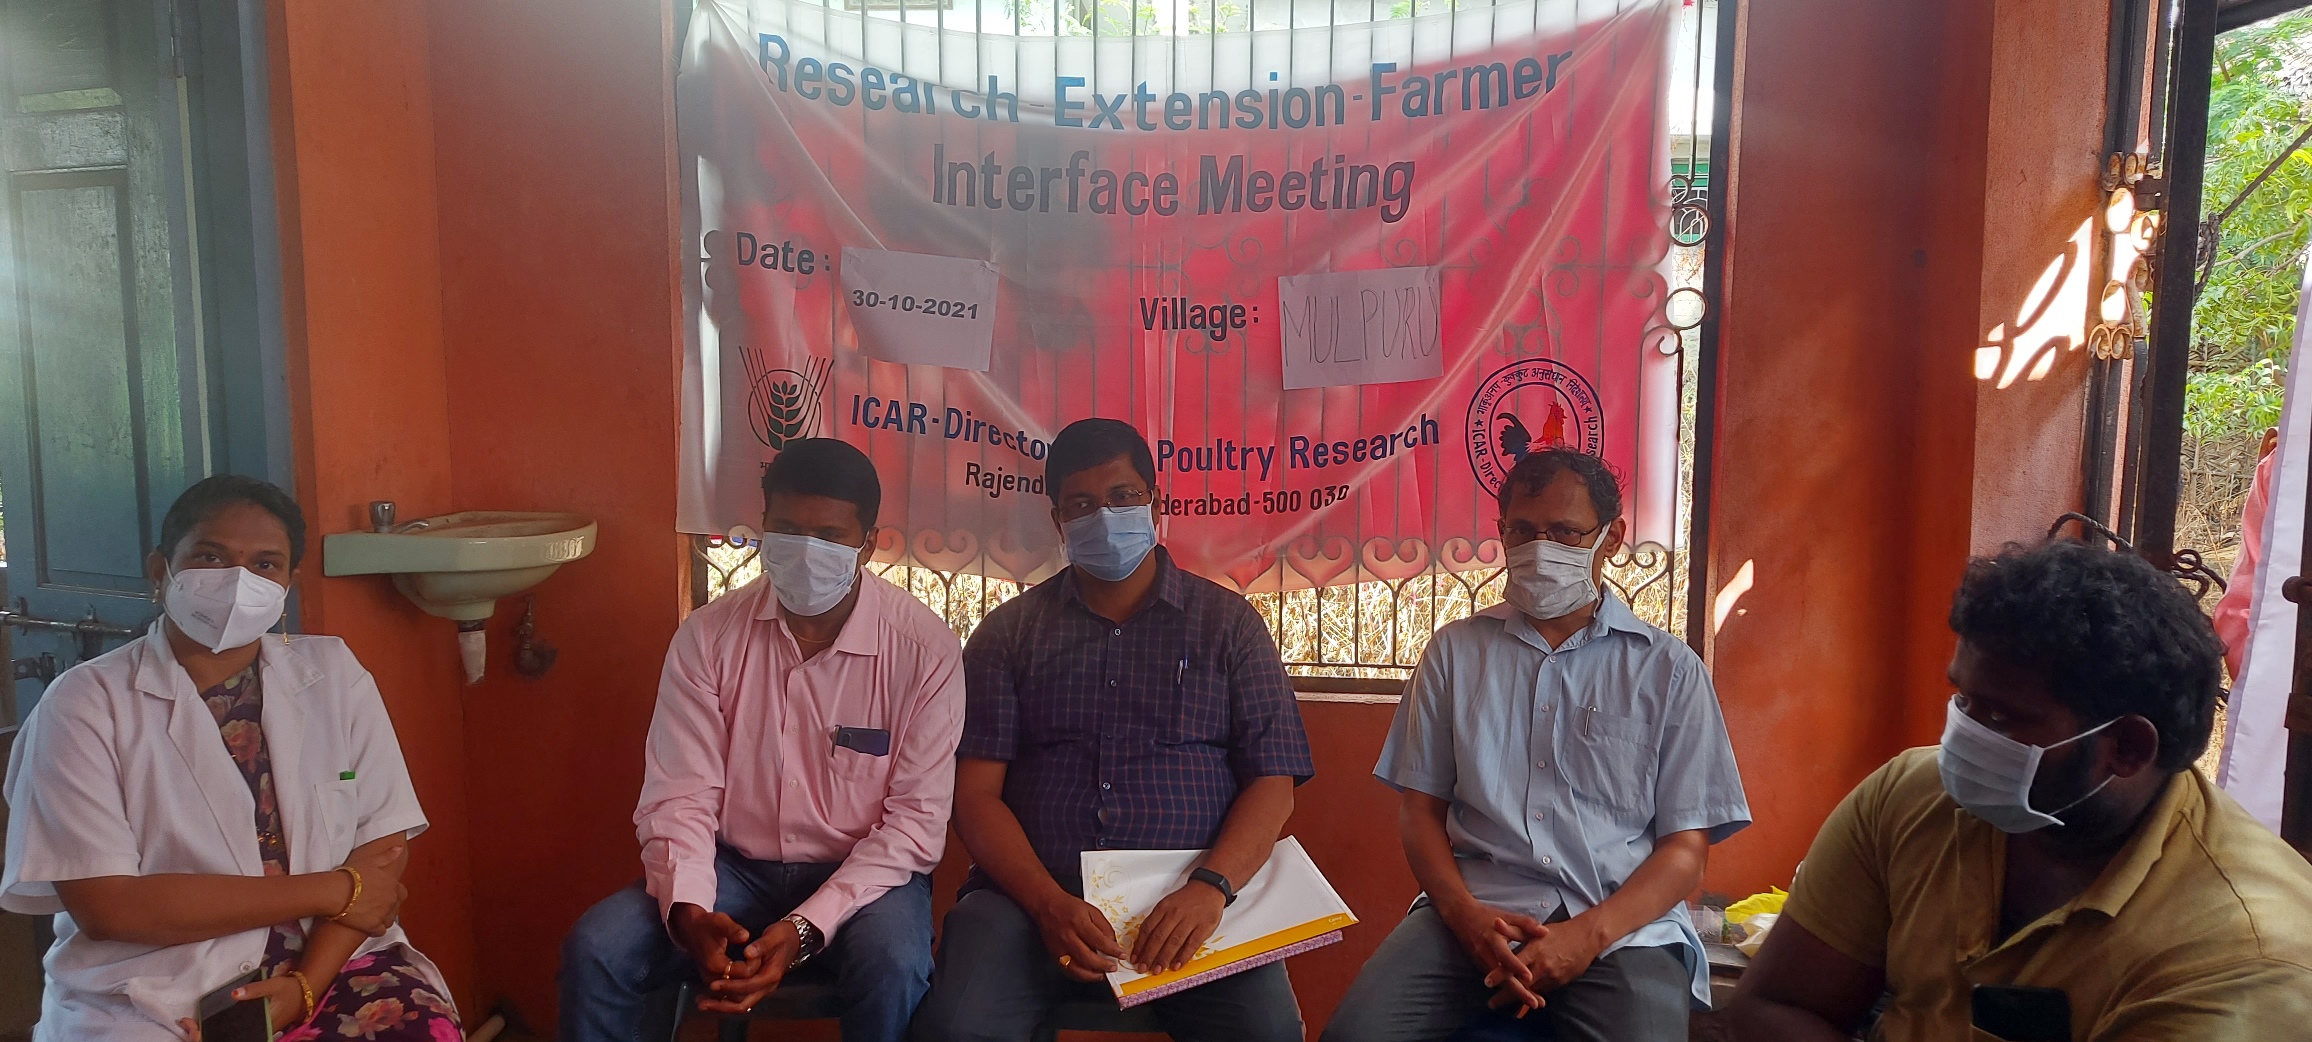 Interface meet with farmers